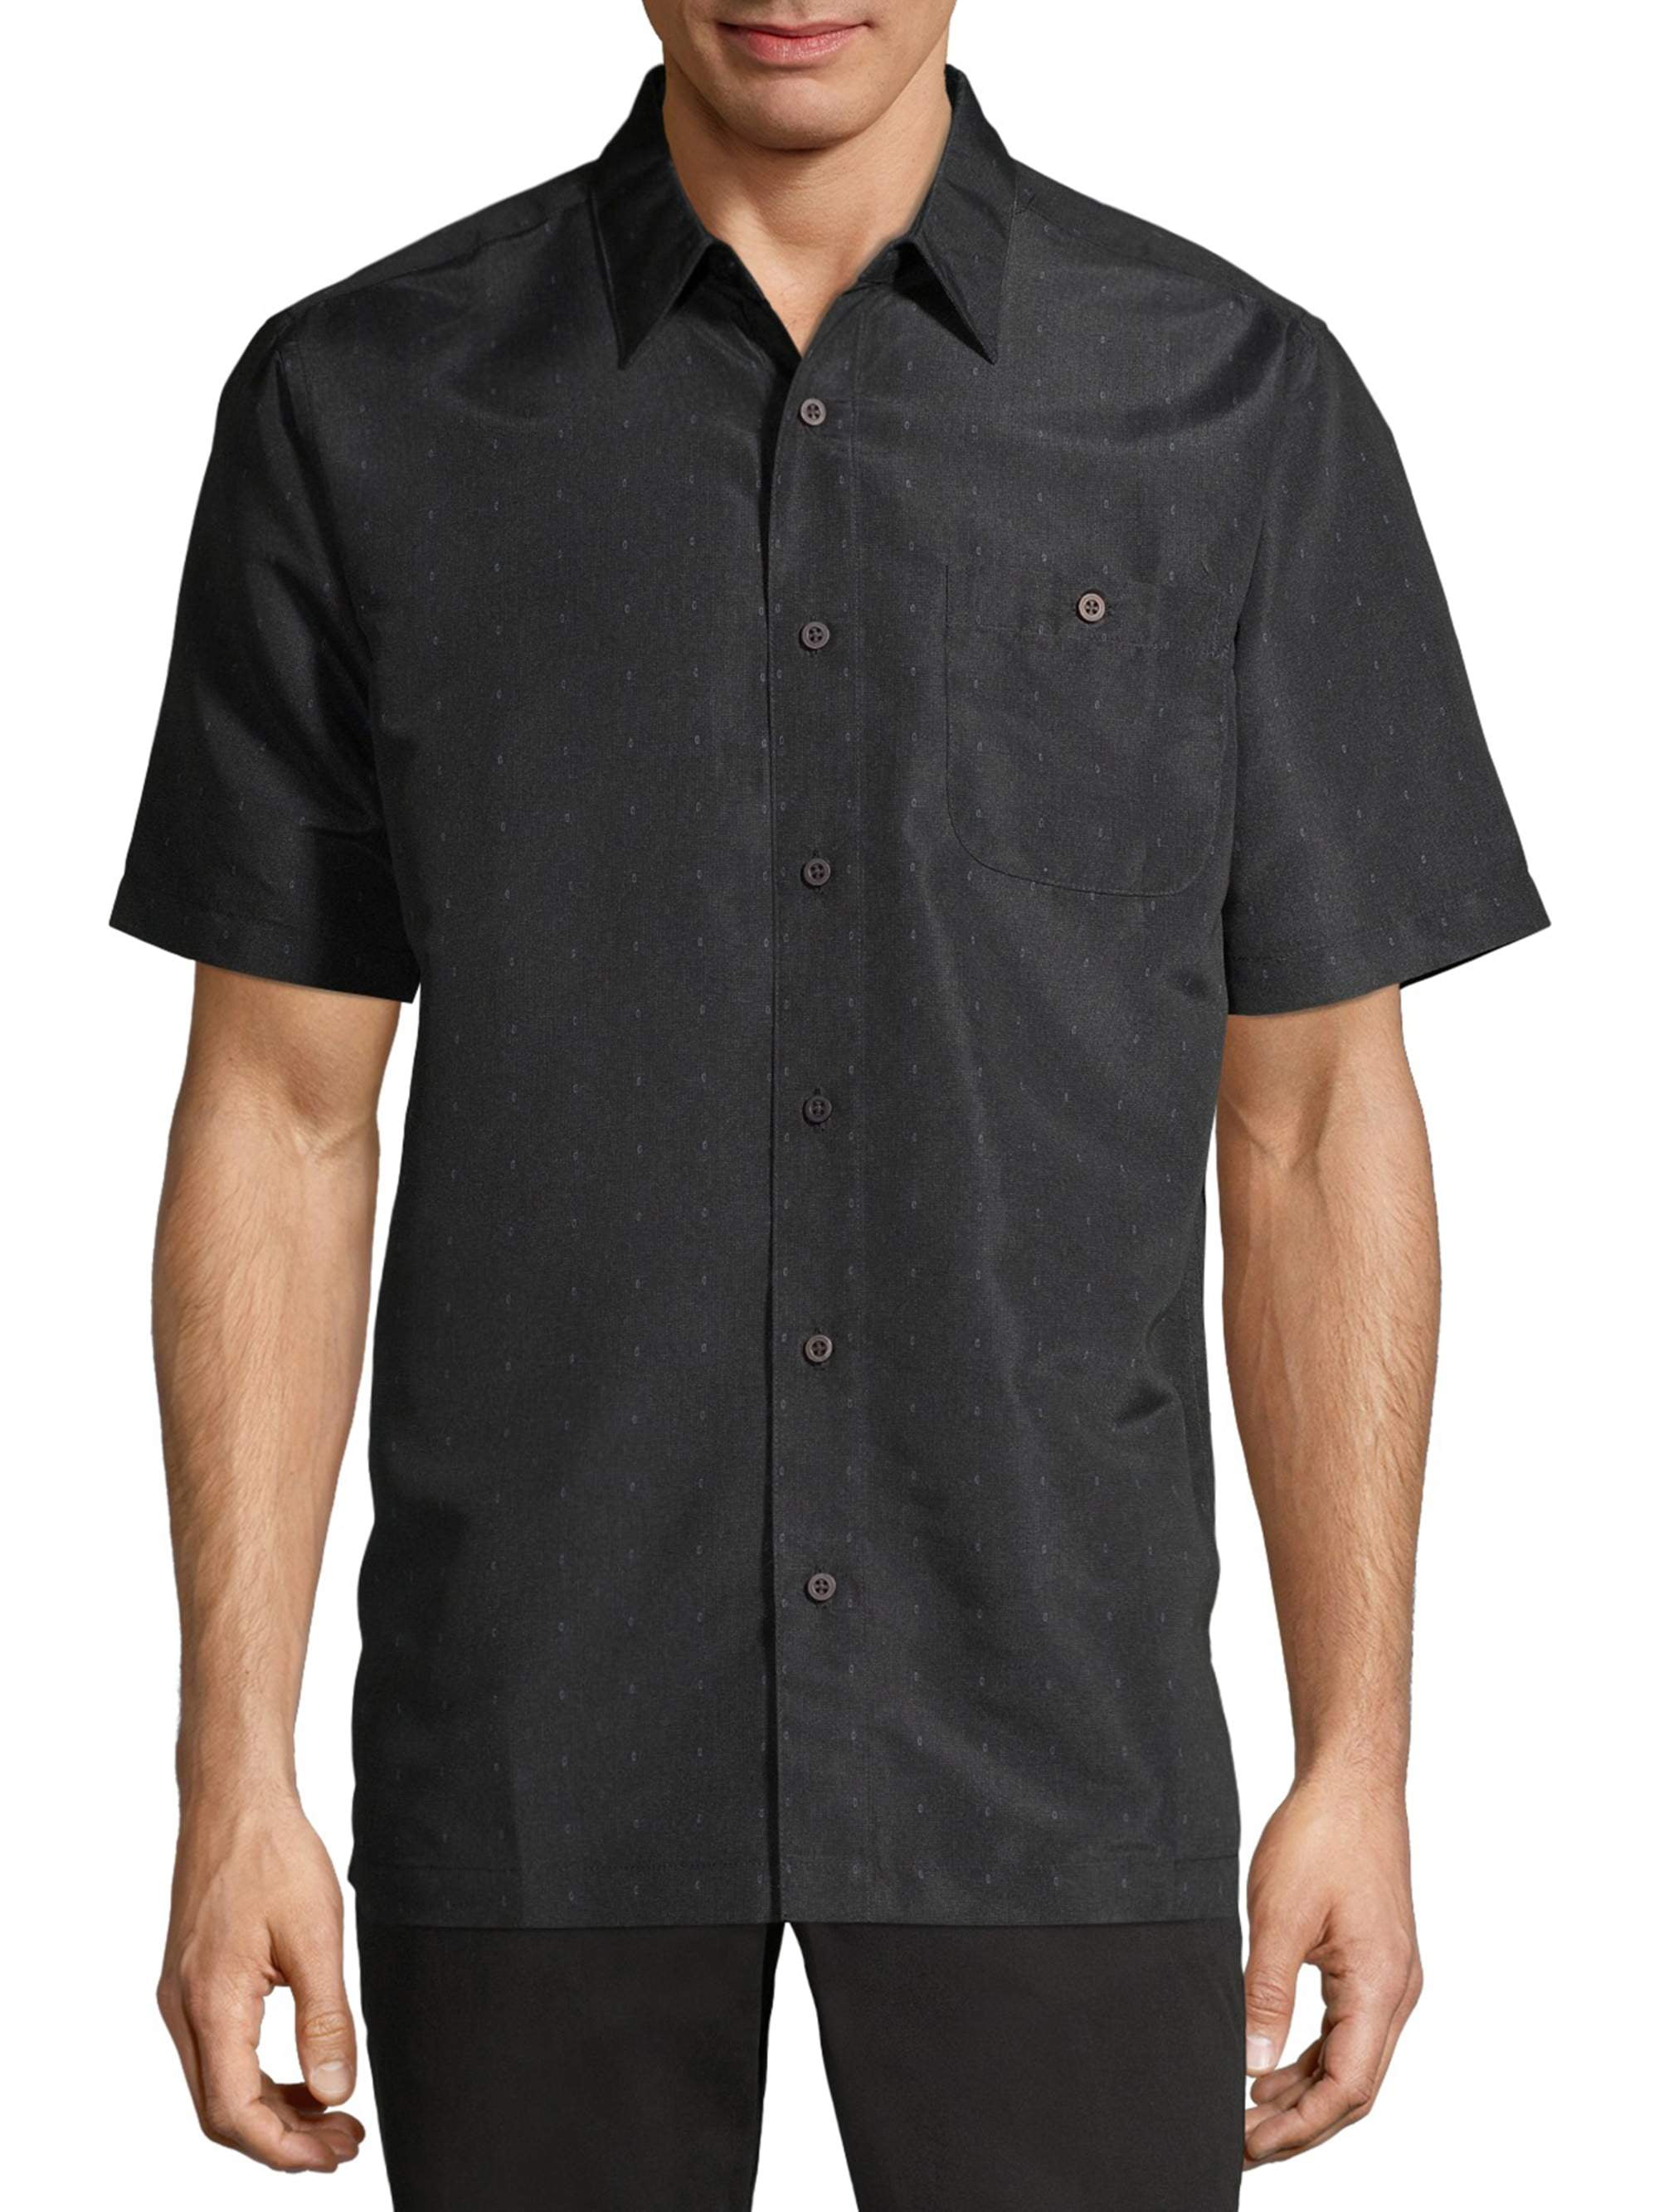 George Men's and Big Men's Short Sleeve Microfiber Shirt up to 5XL ...